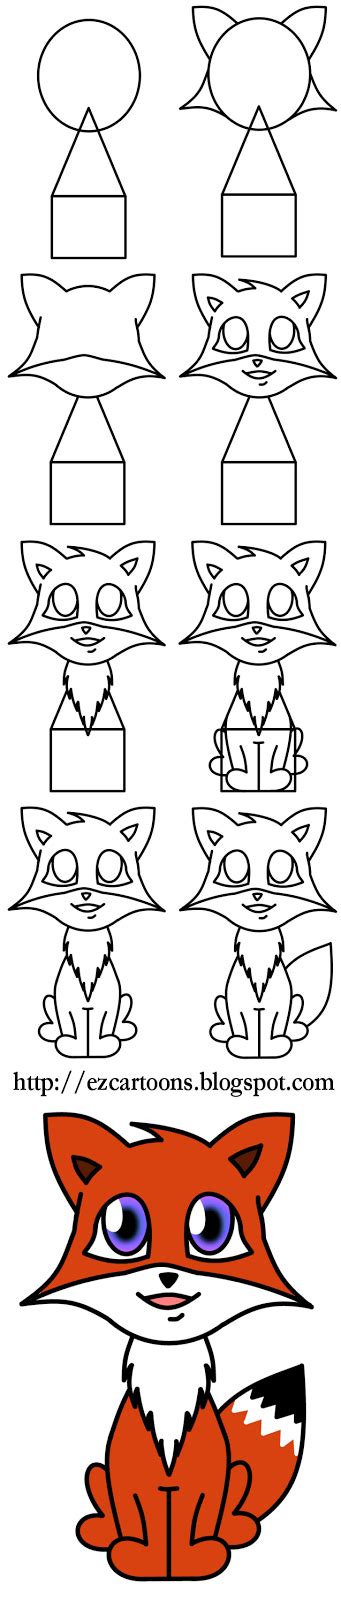 Easy To Draw Cartoons How To Draw A Fox